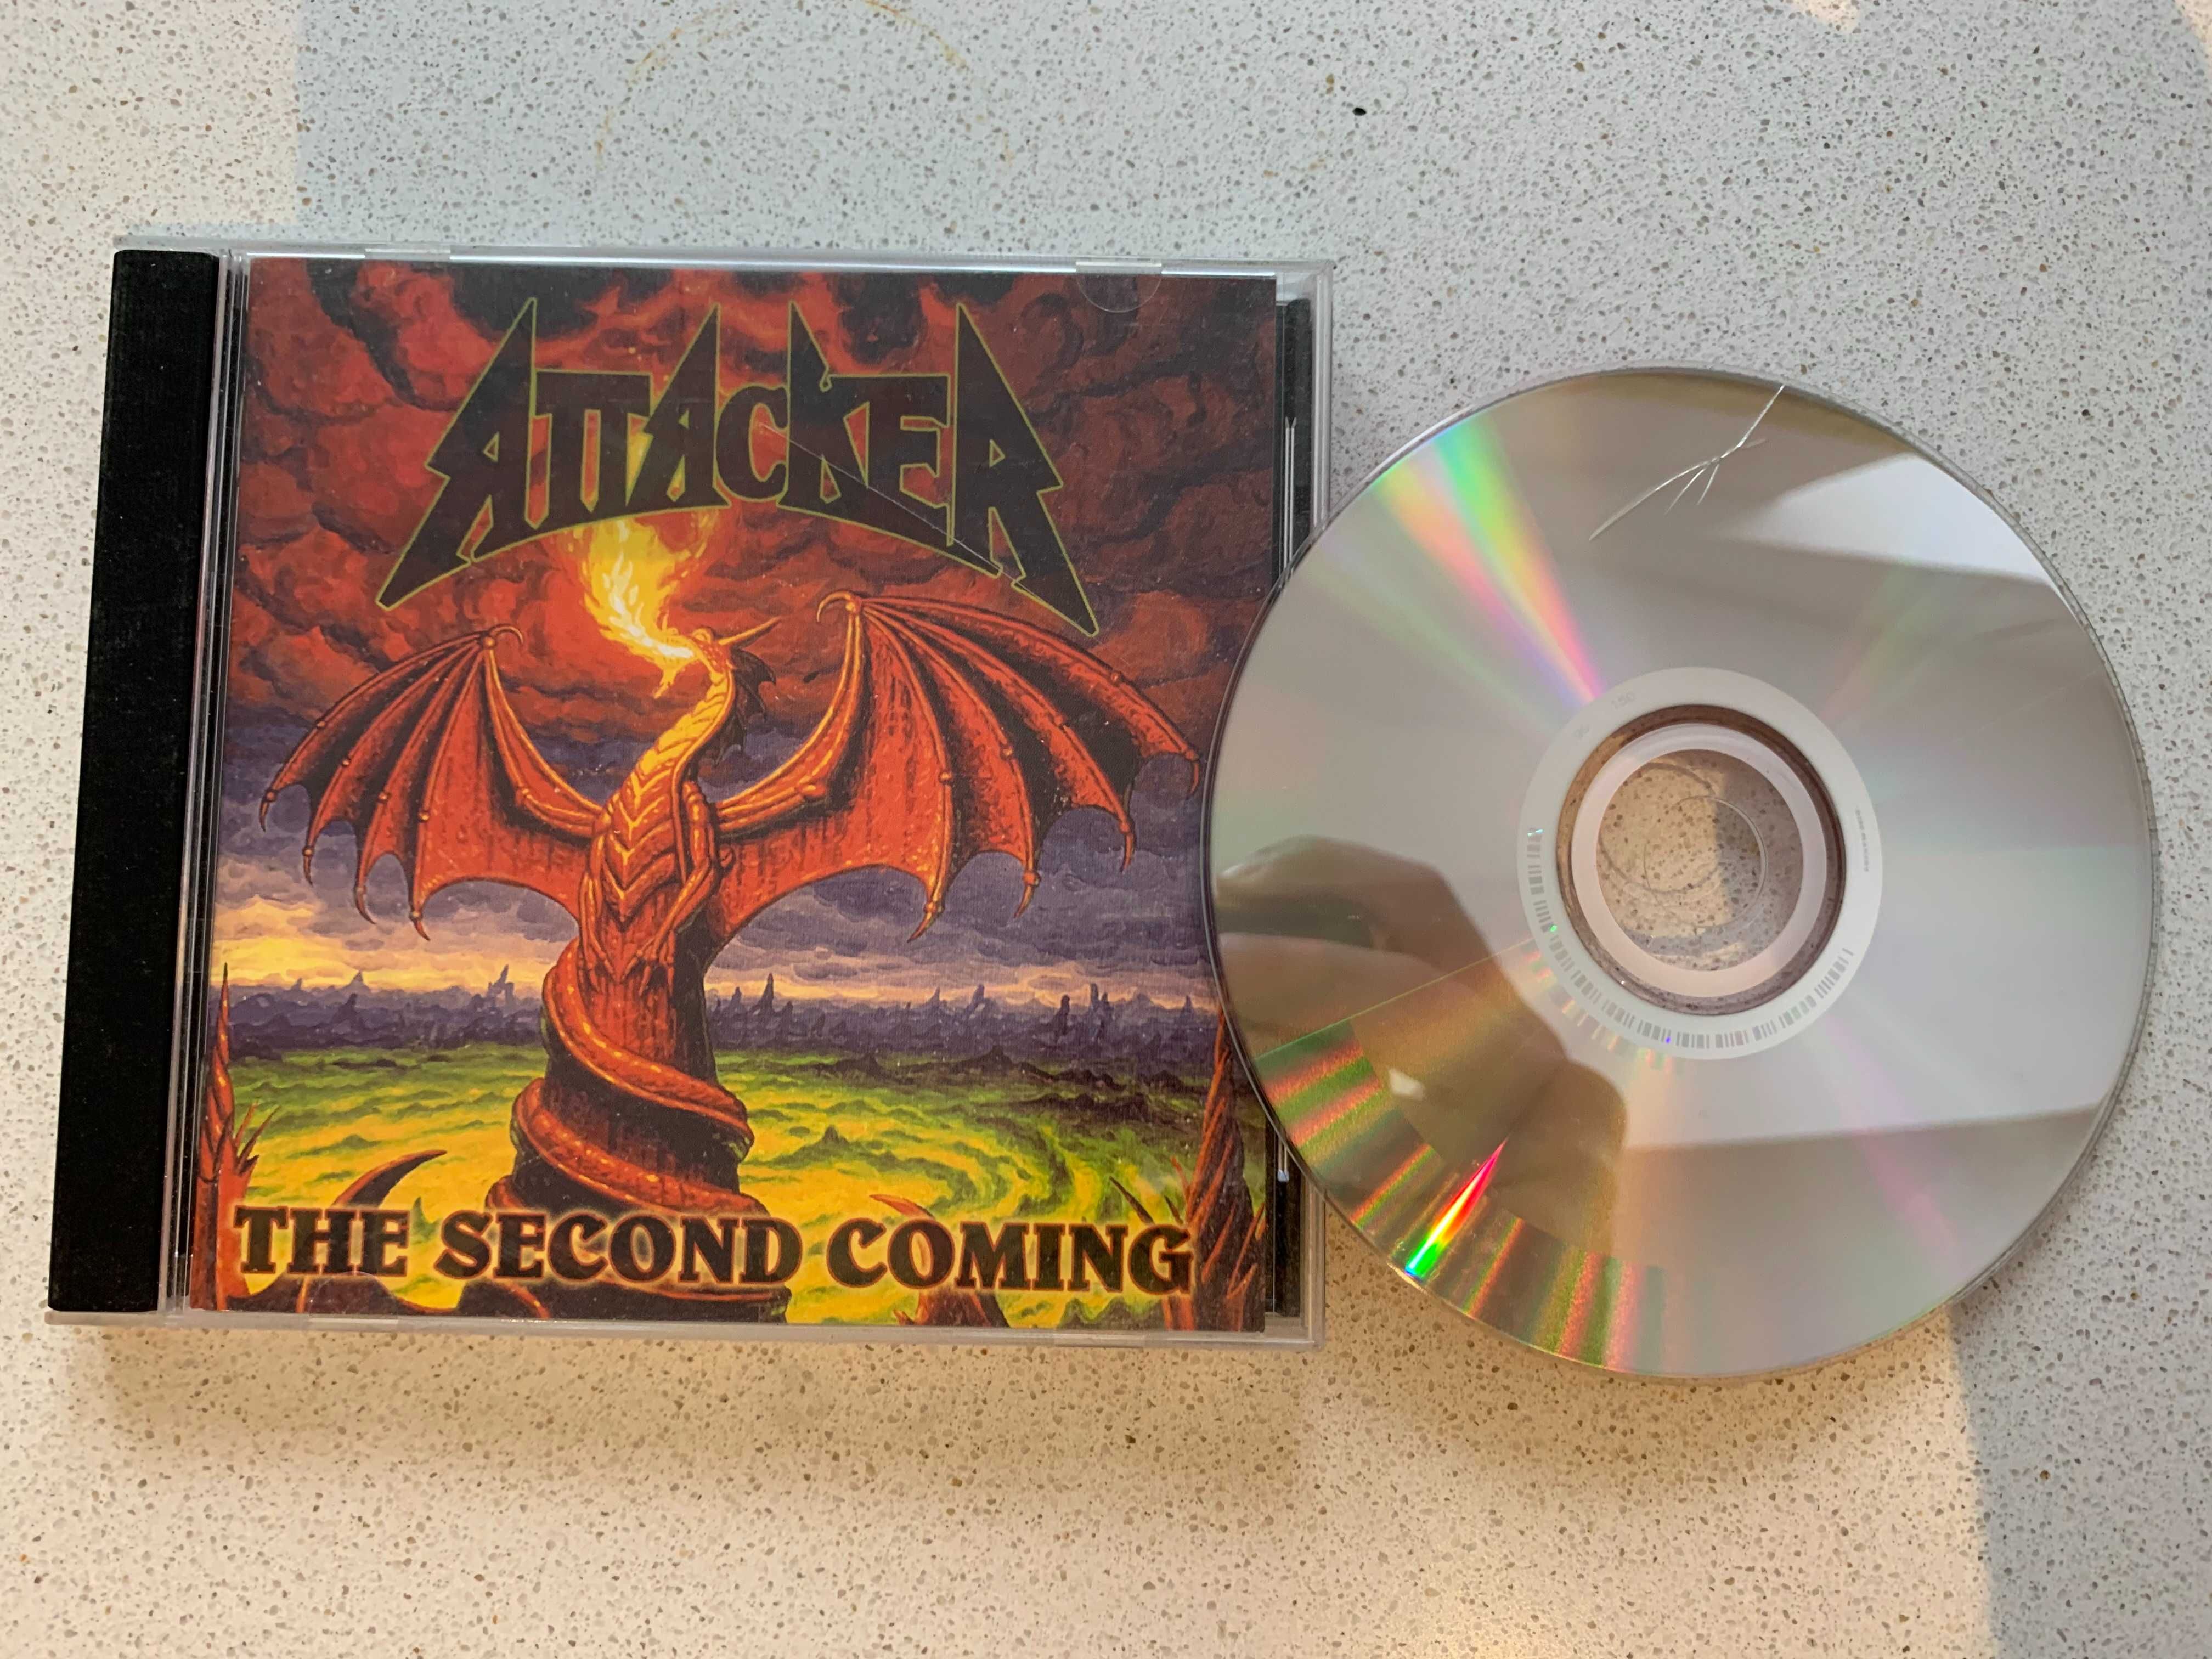 Attacker - The Second Coming (CD)